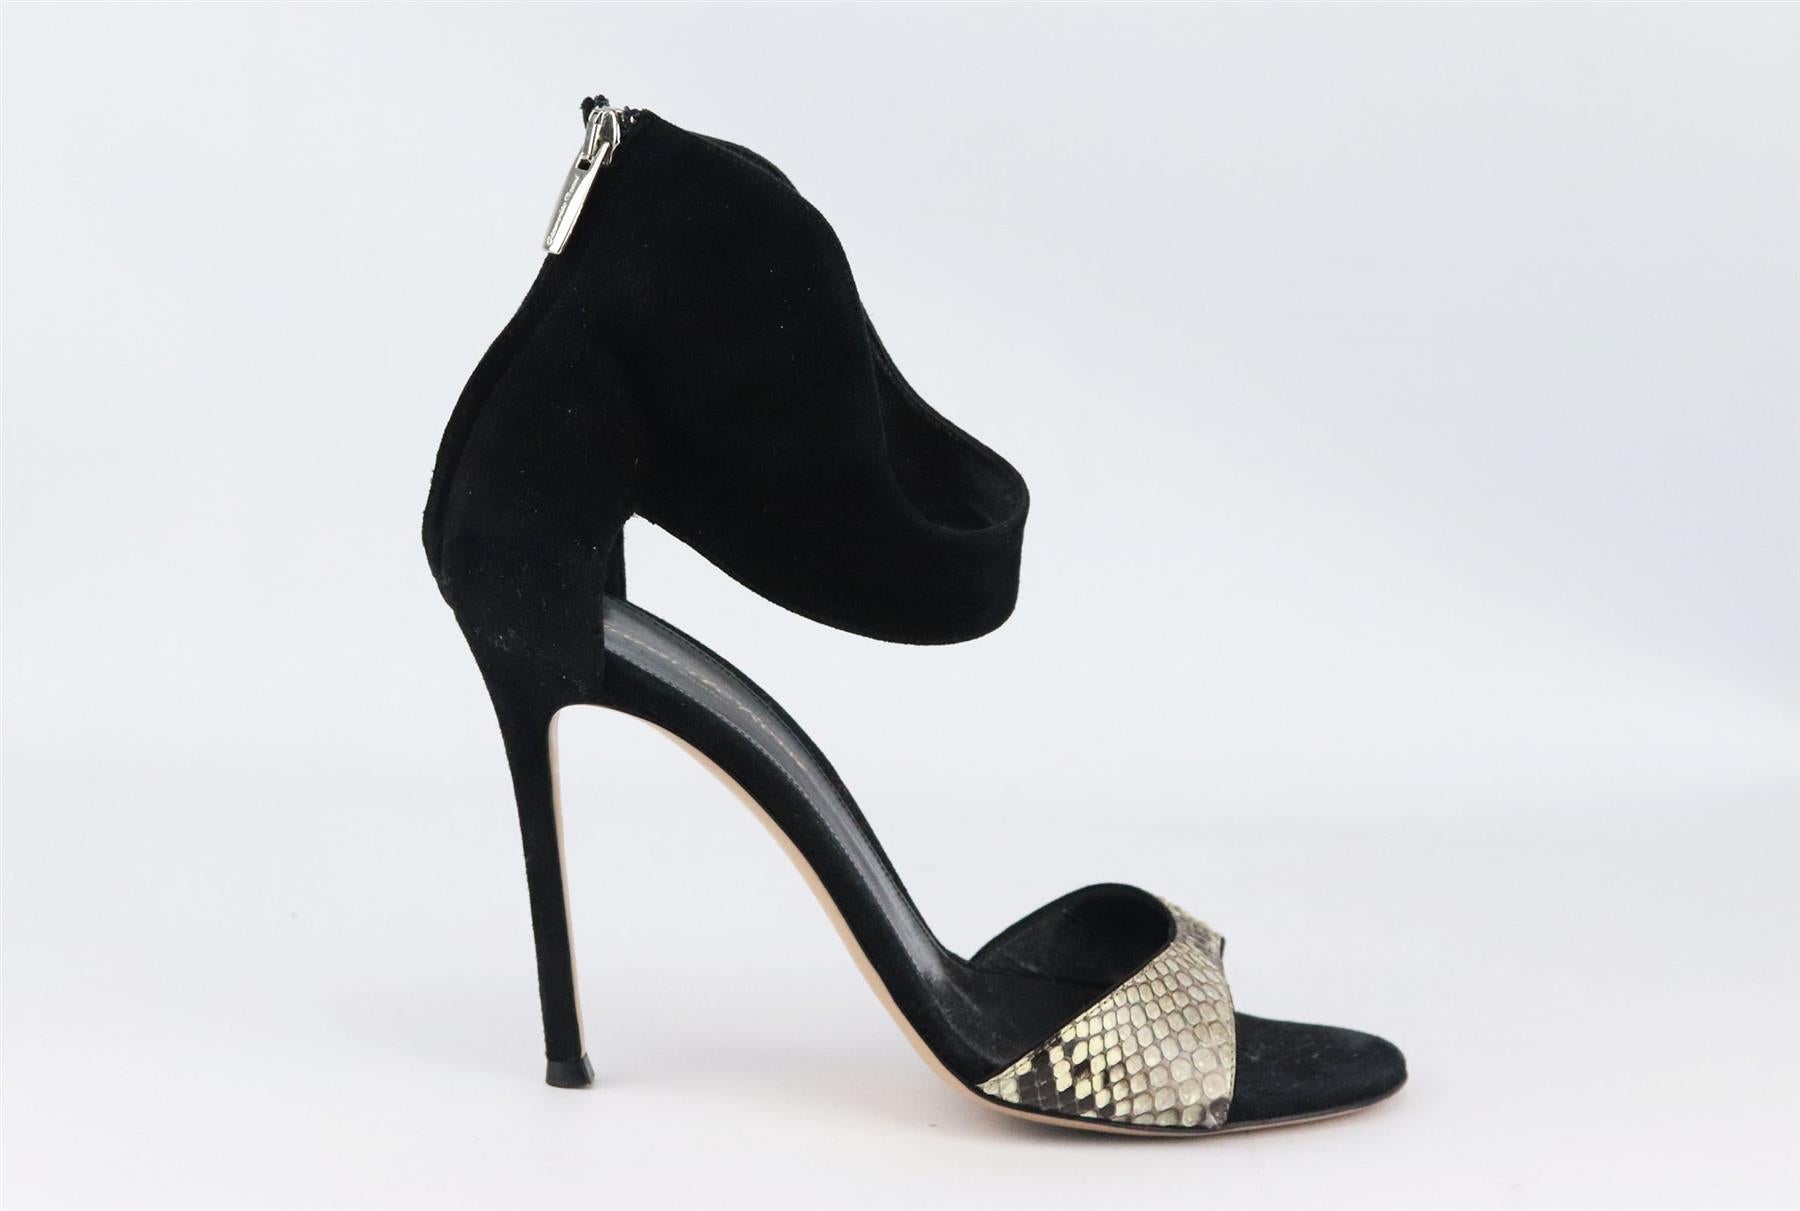 GIANVITO ROSSI PYTHON AND SUEDE SANDALS EU 38.5 UK 5.5 US 8.5